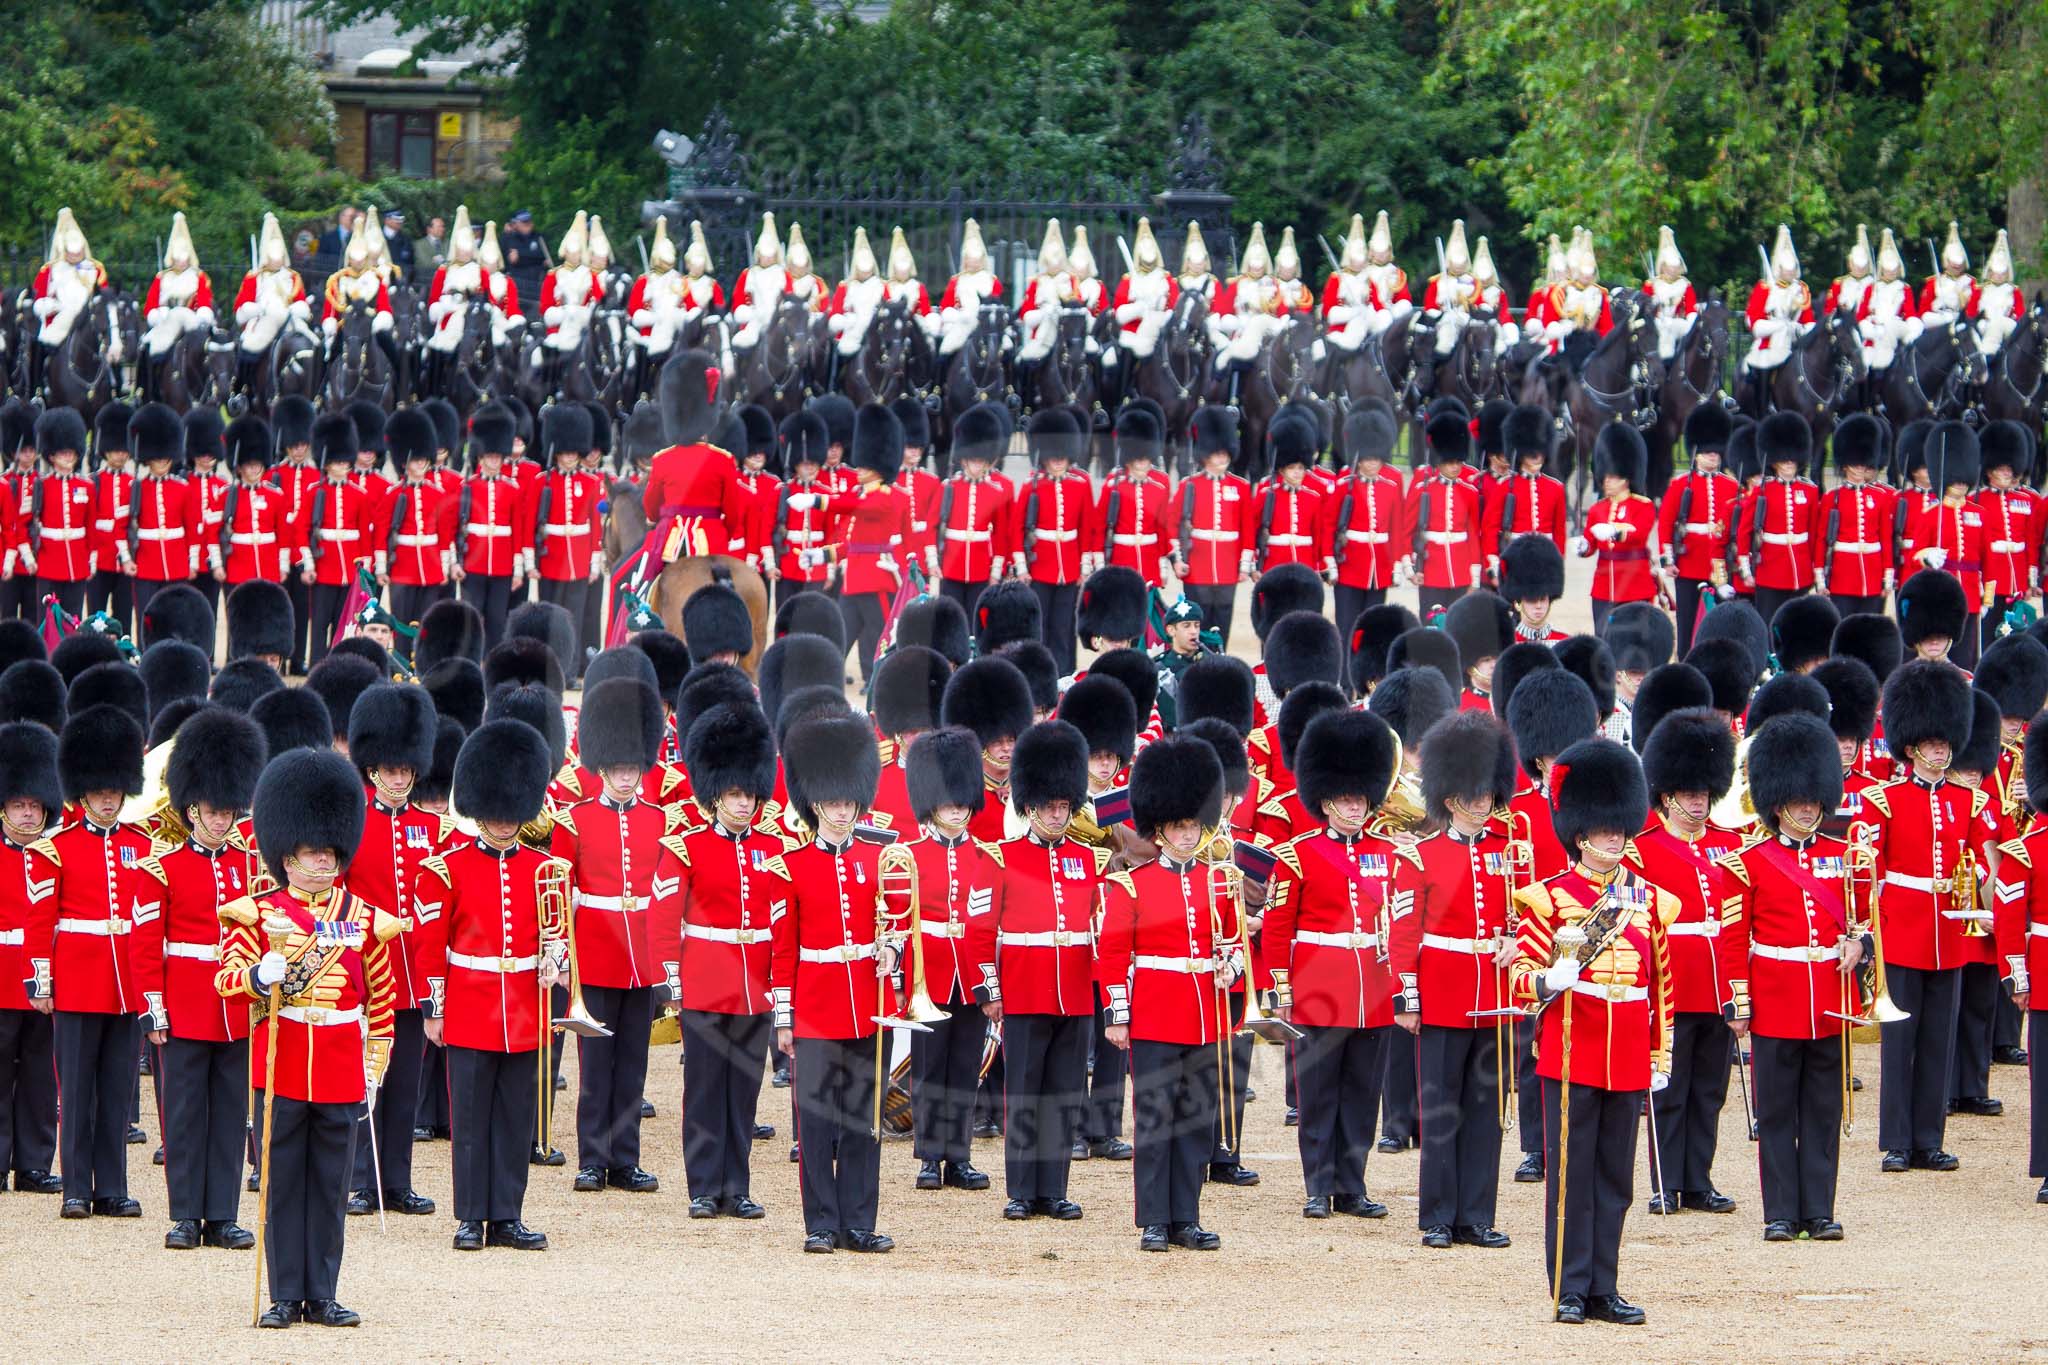 The Colonel's Review 2012: The Band of the Grenadier Guards, on the left, with Drum Major Stephen Staite, Grenadier Guards, and the Band of the Scots Guards, on the right, with Drum Major Scott Fitzgerald, Coldstream Guards..
Horse Guards Parade, Westminster,
London SW1,

United Kingdom,
on 09 June 2012 at 11:48, image #363